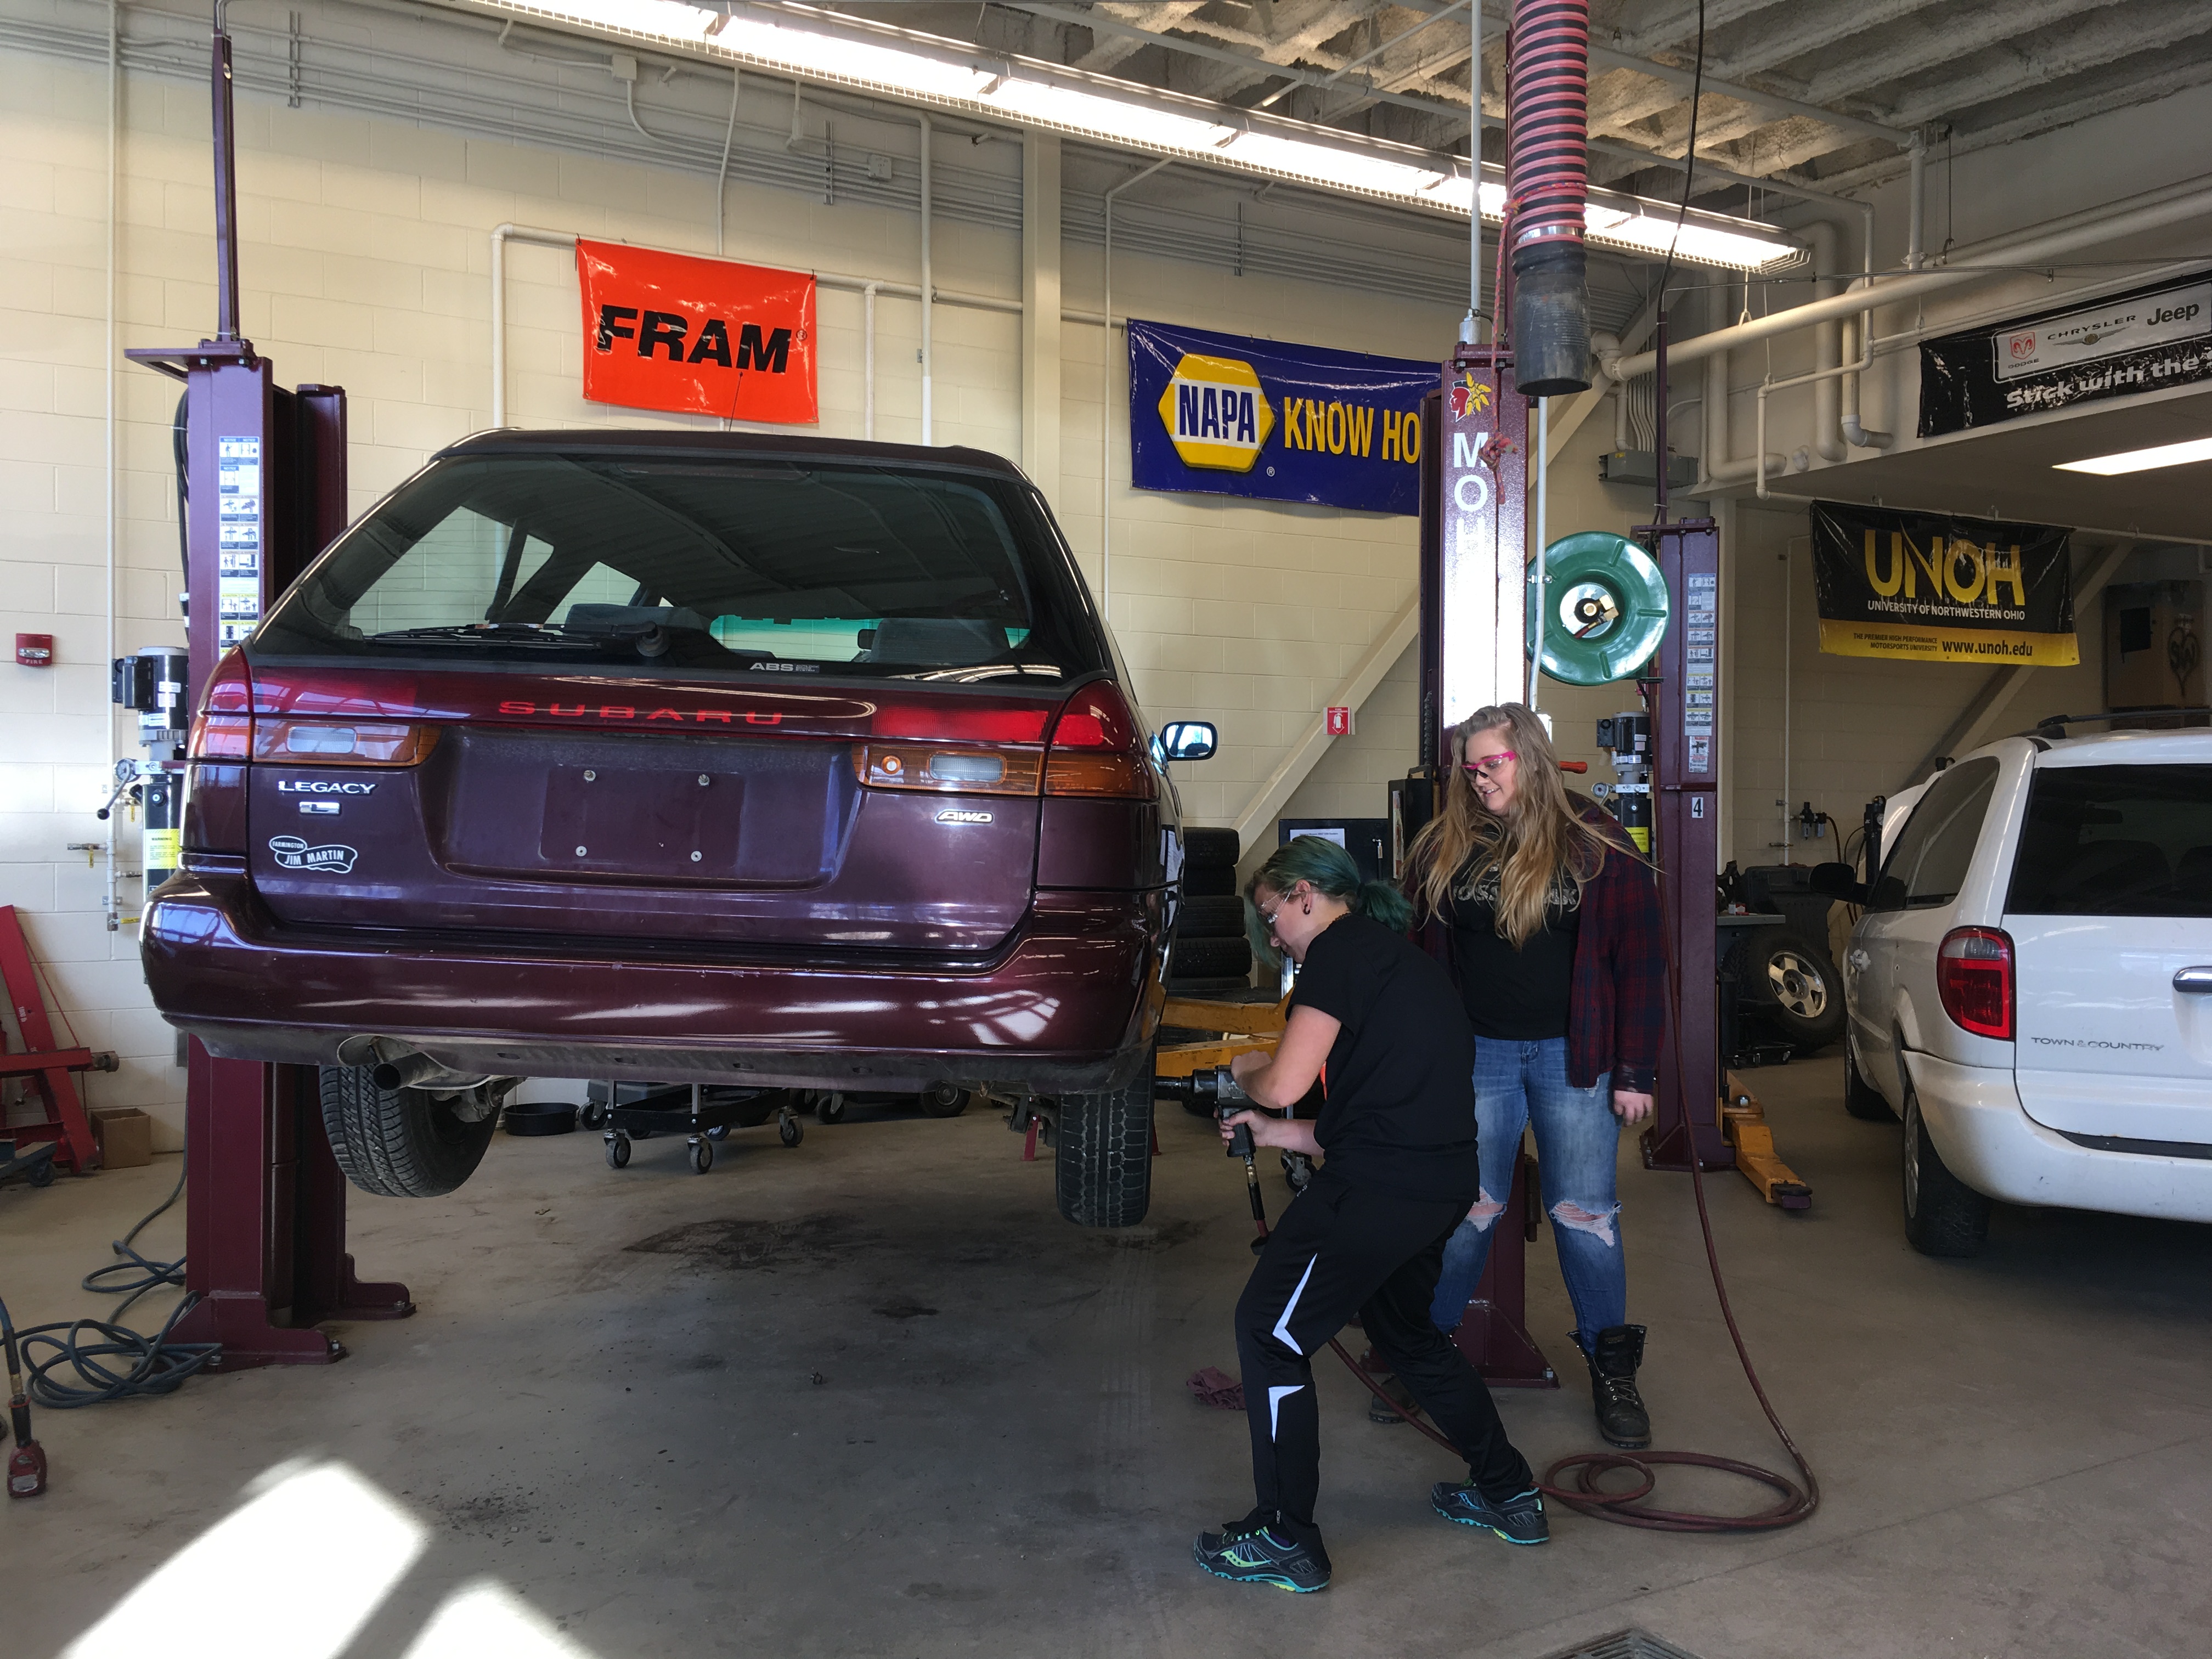 Two Totally Trades participants removing a car tire